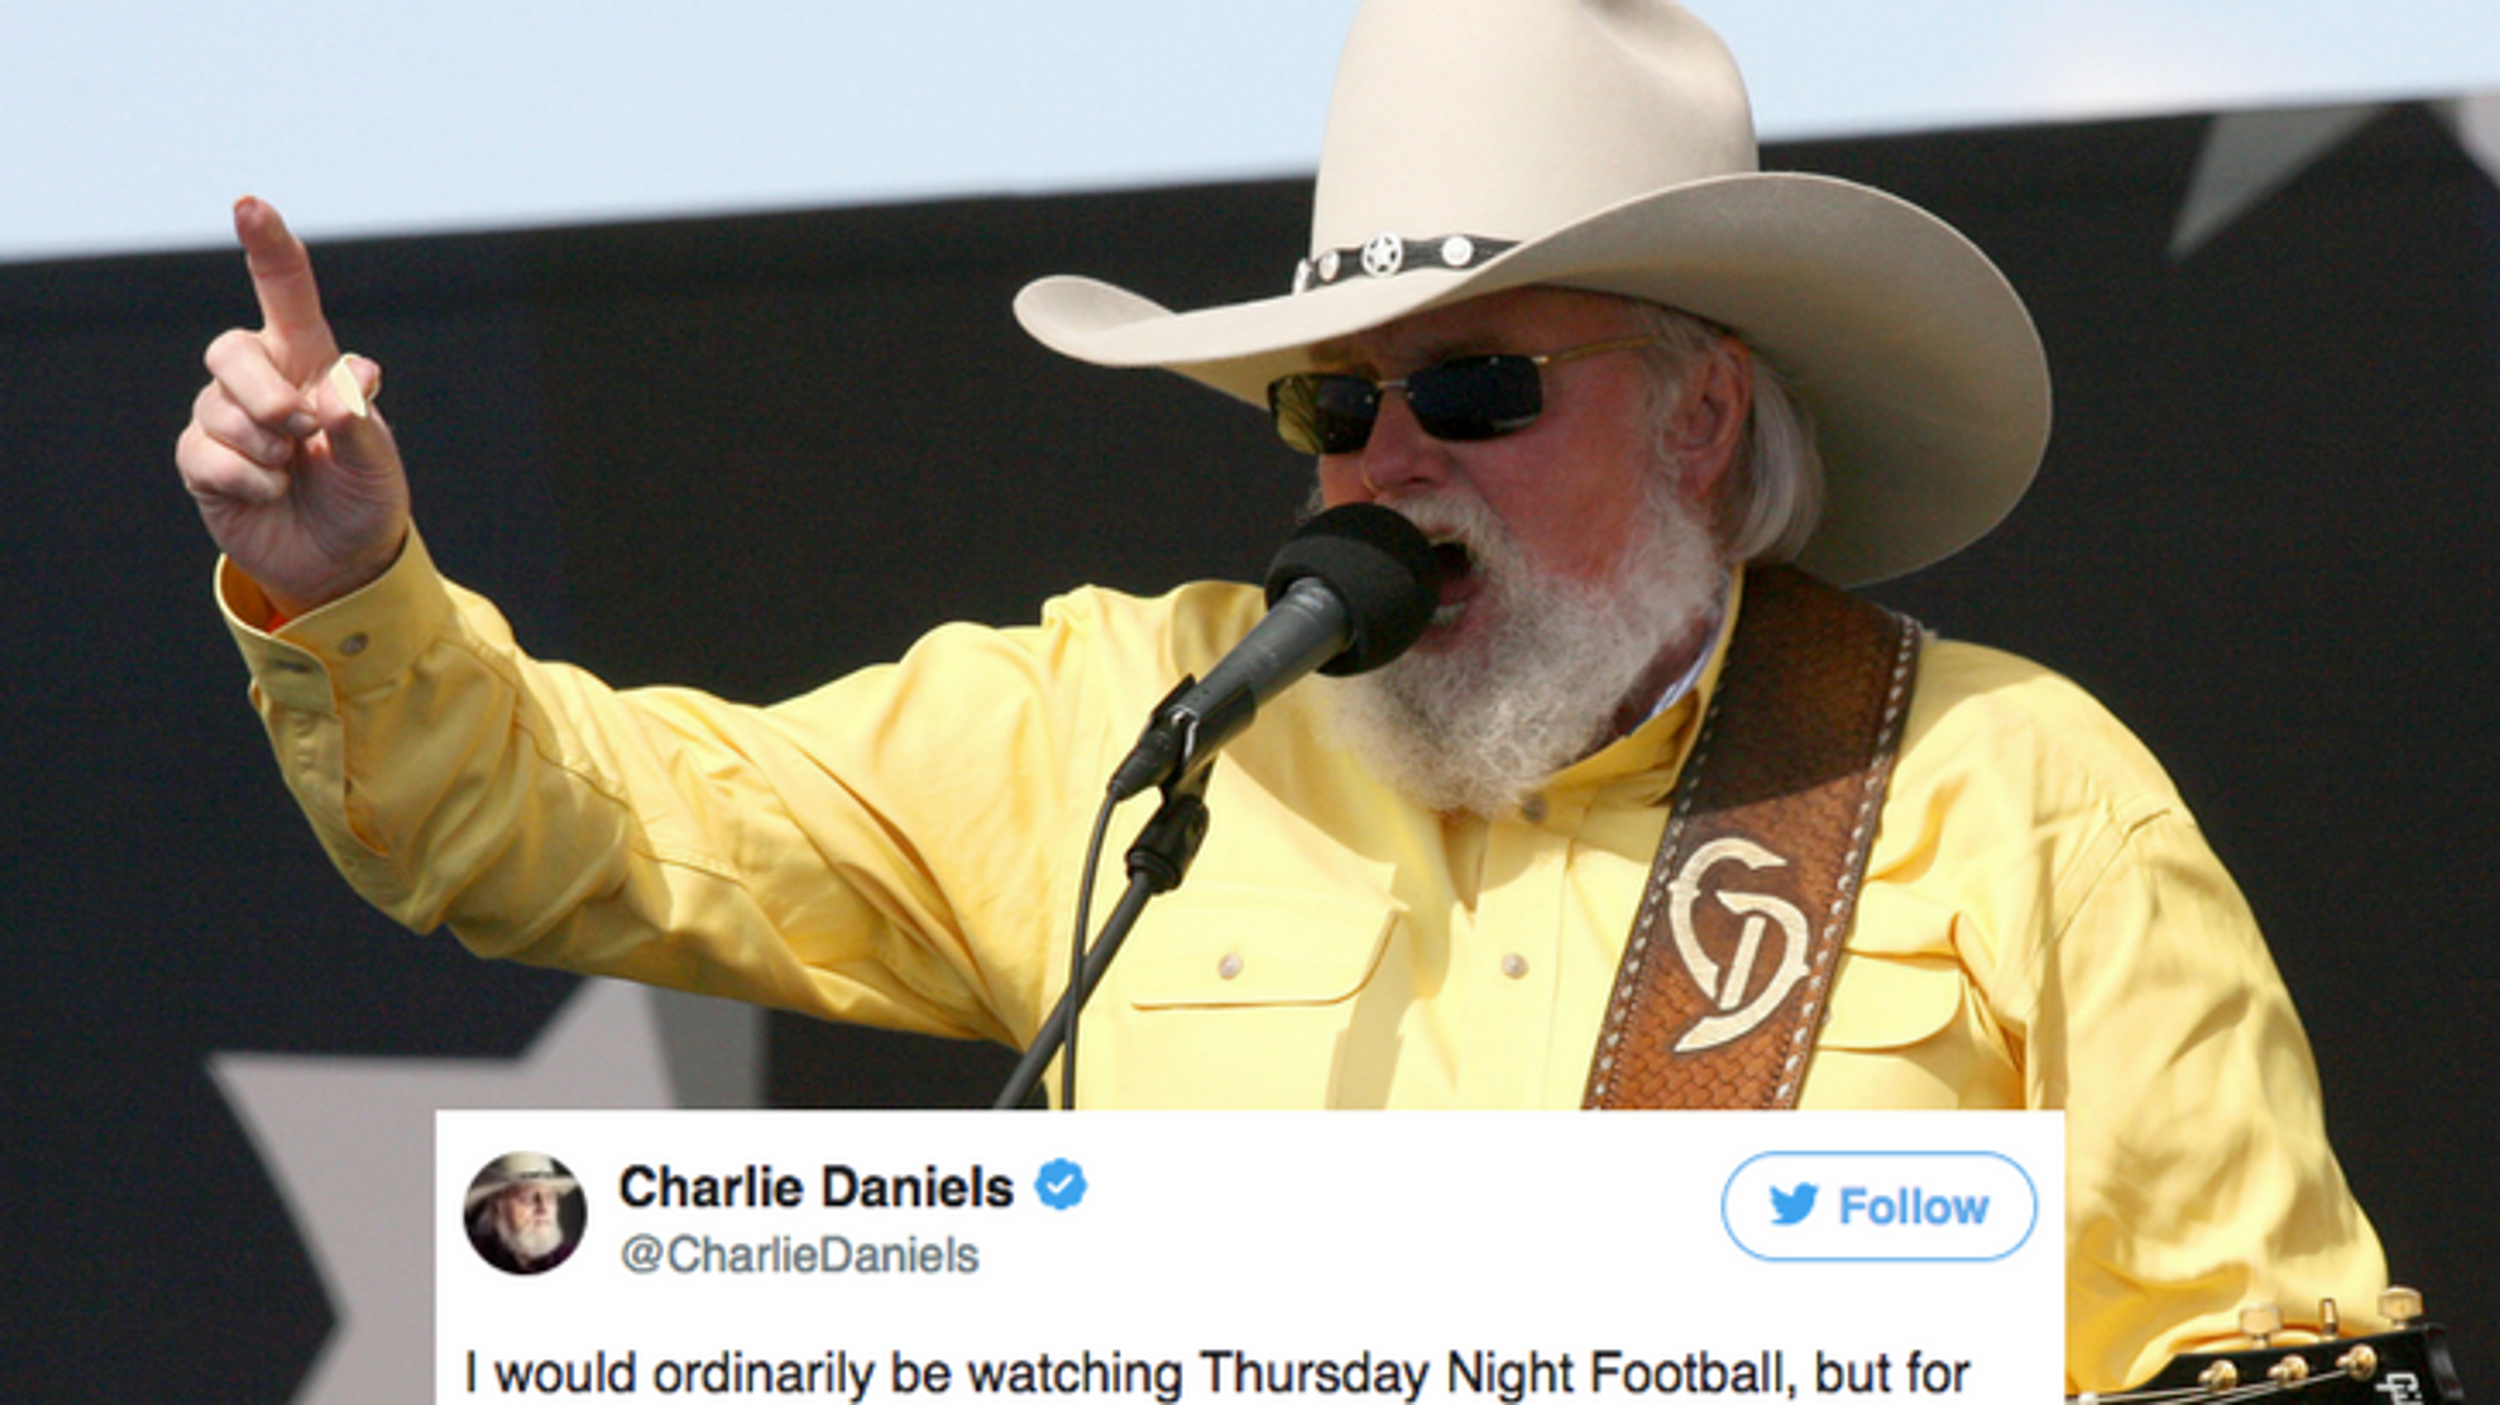 Charlie Daniels Makes Error In Rant Against NFL Protesters